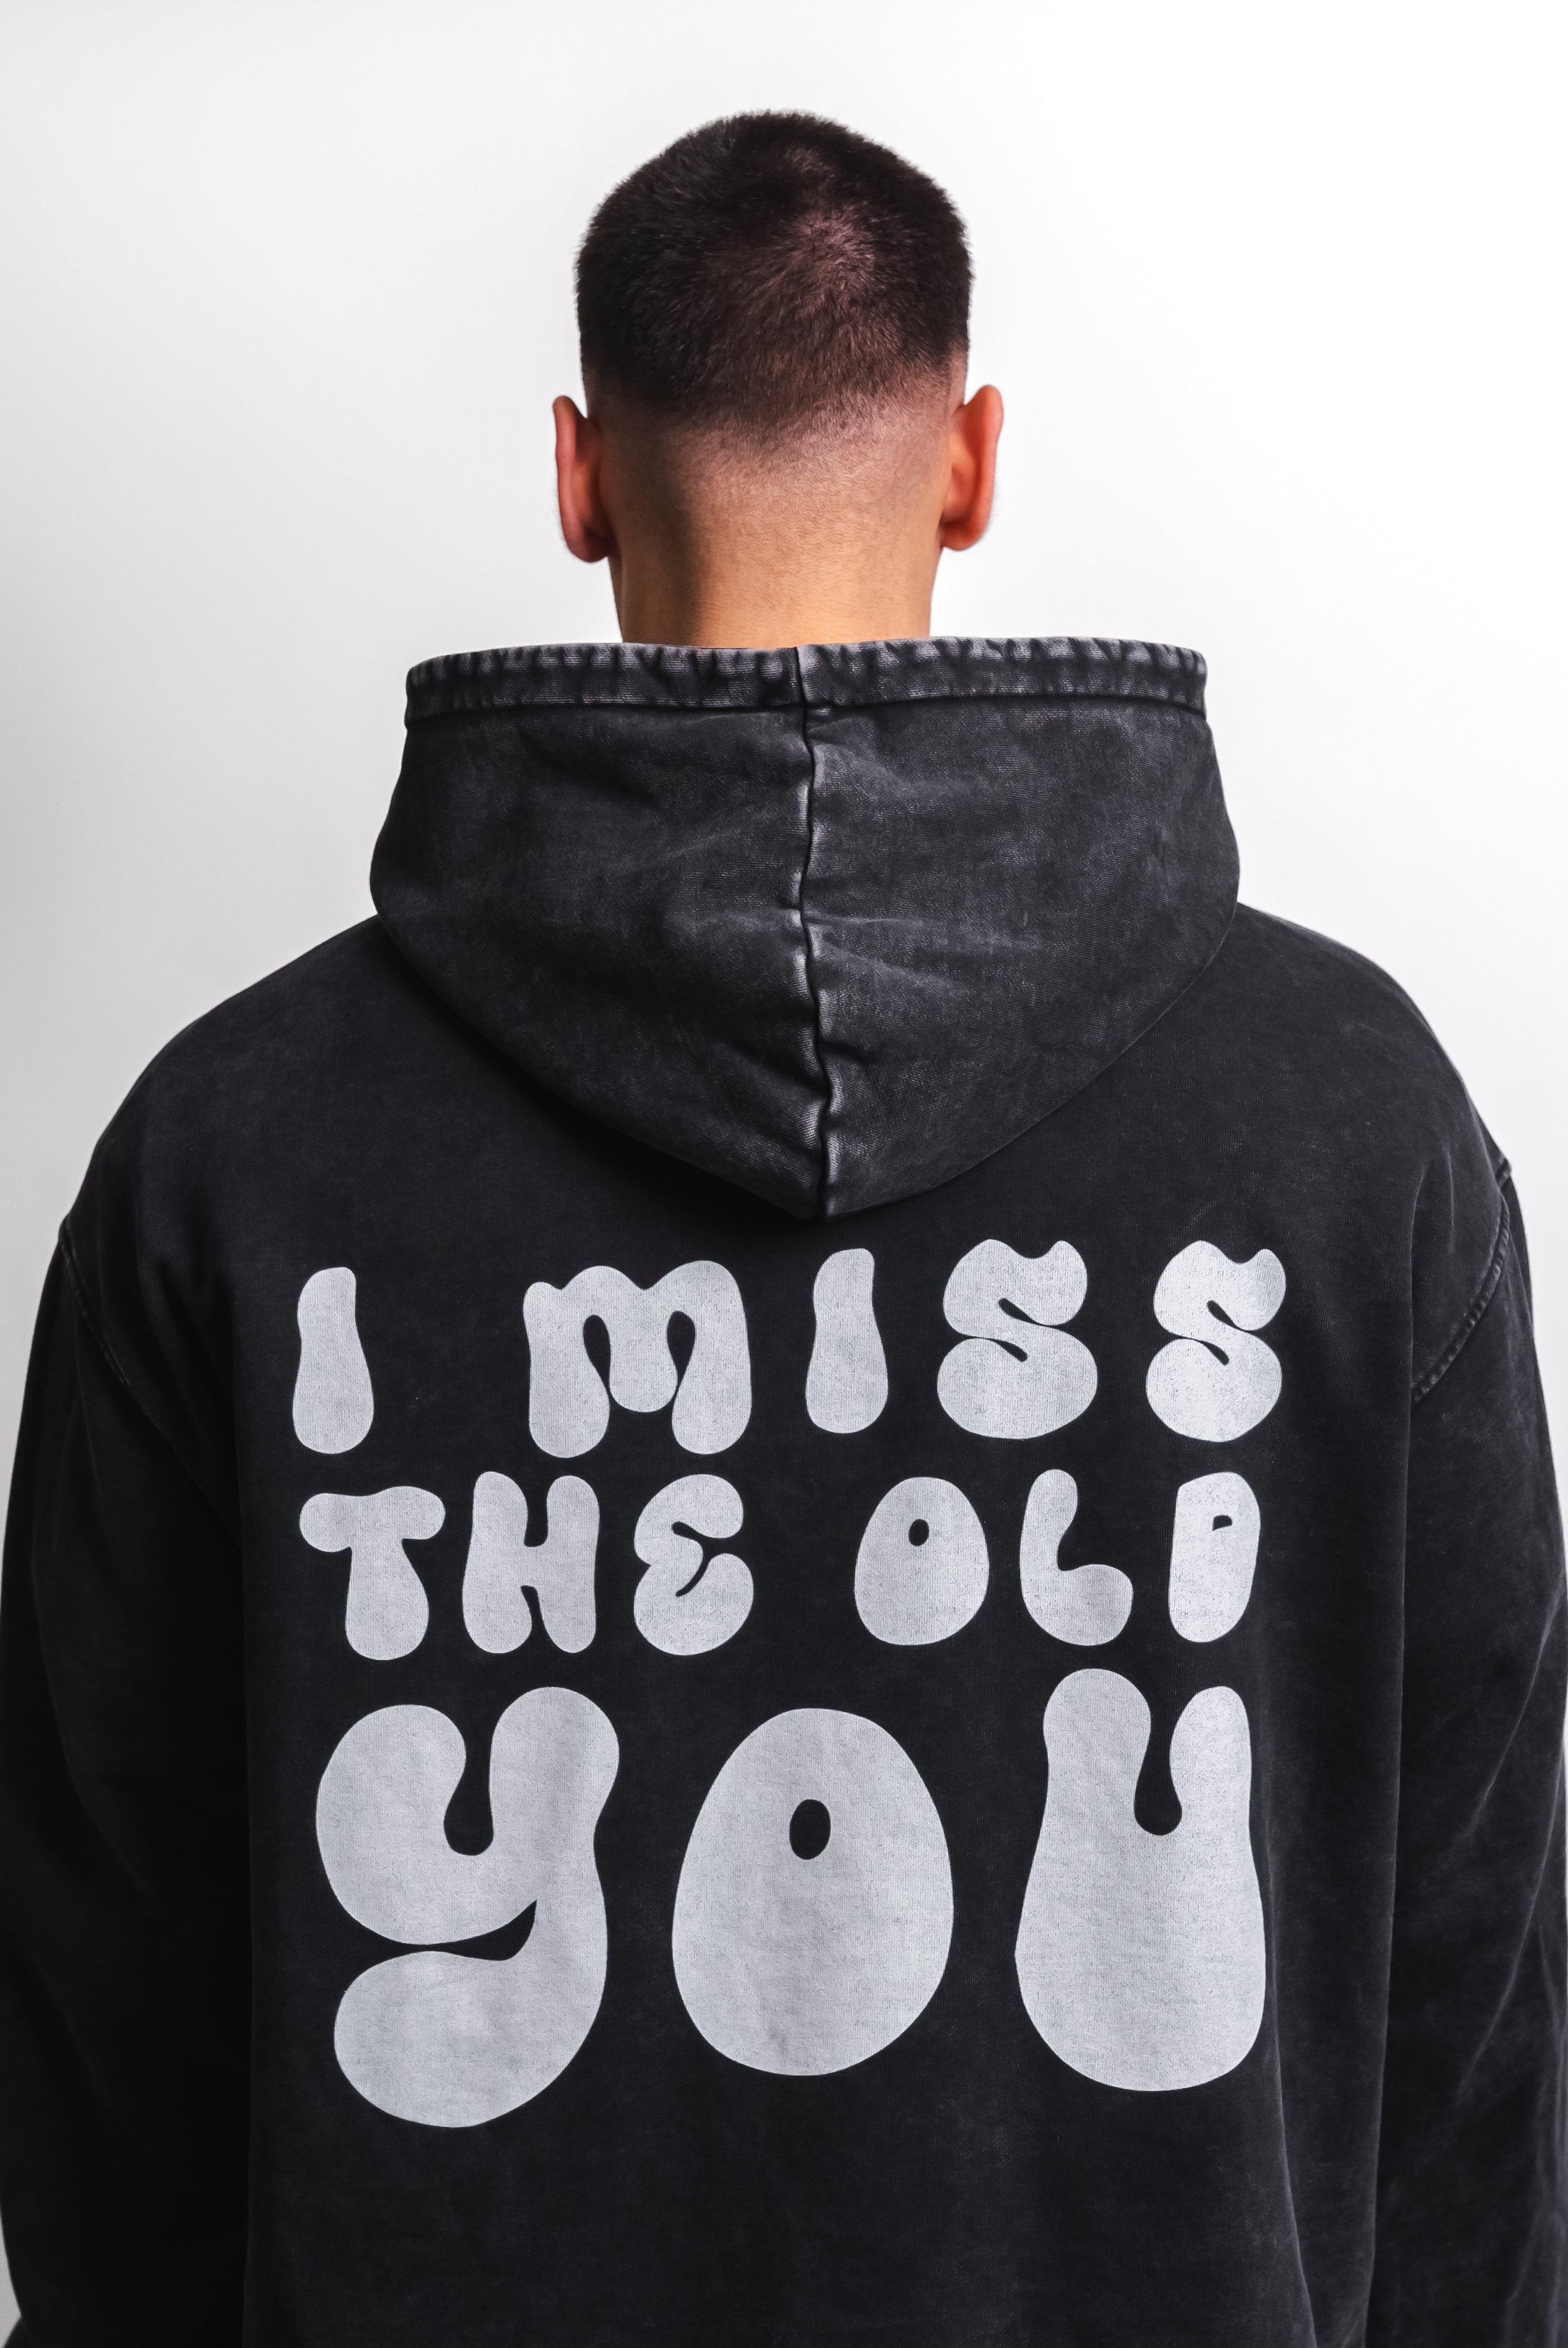 "I Miss The Old You" Hoodie